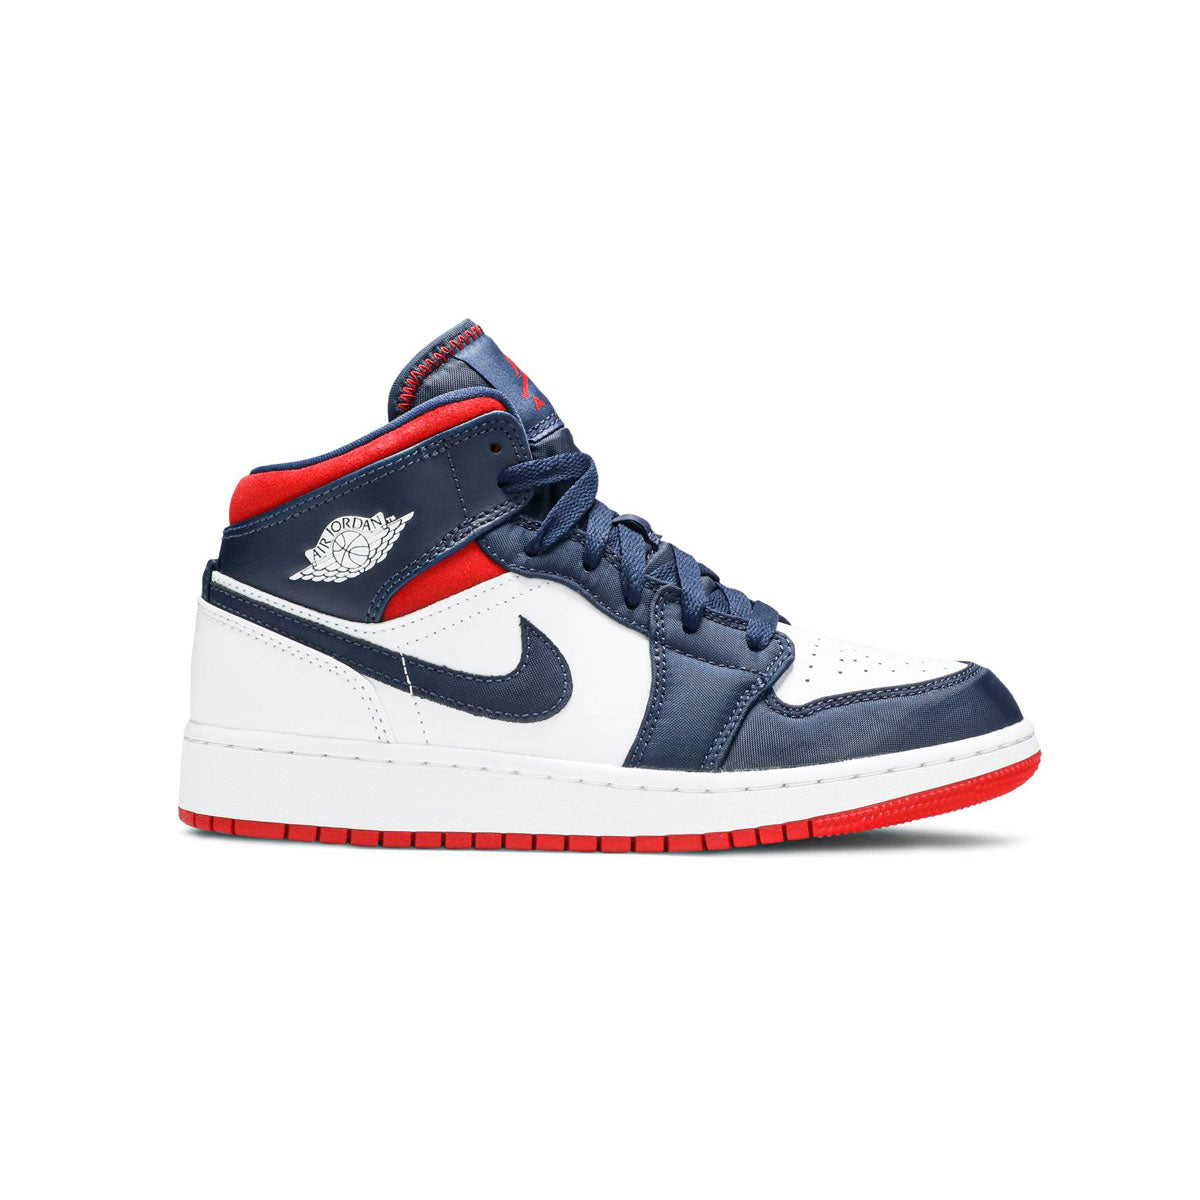 jordan 1 mid red white and blue